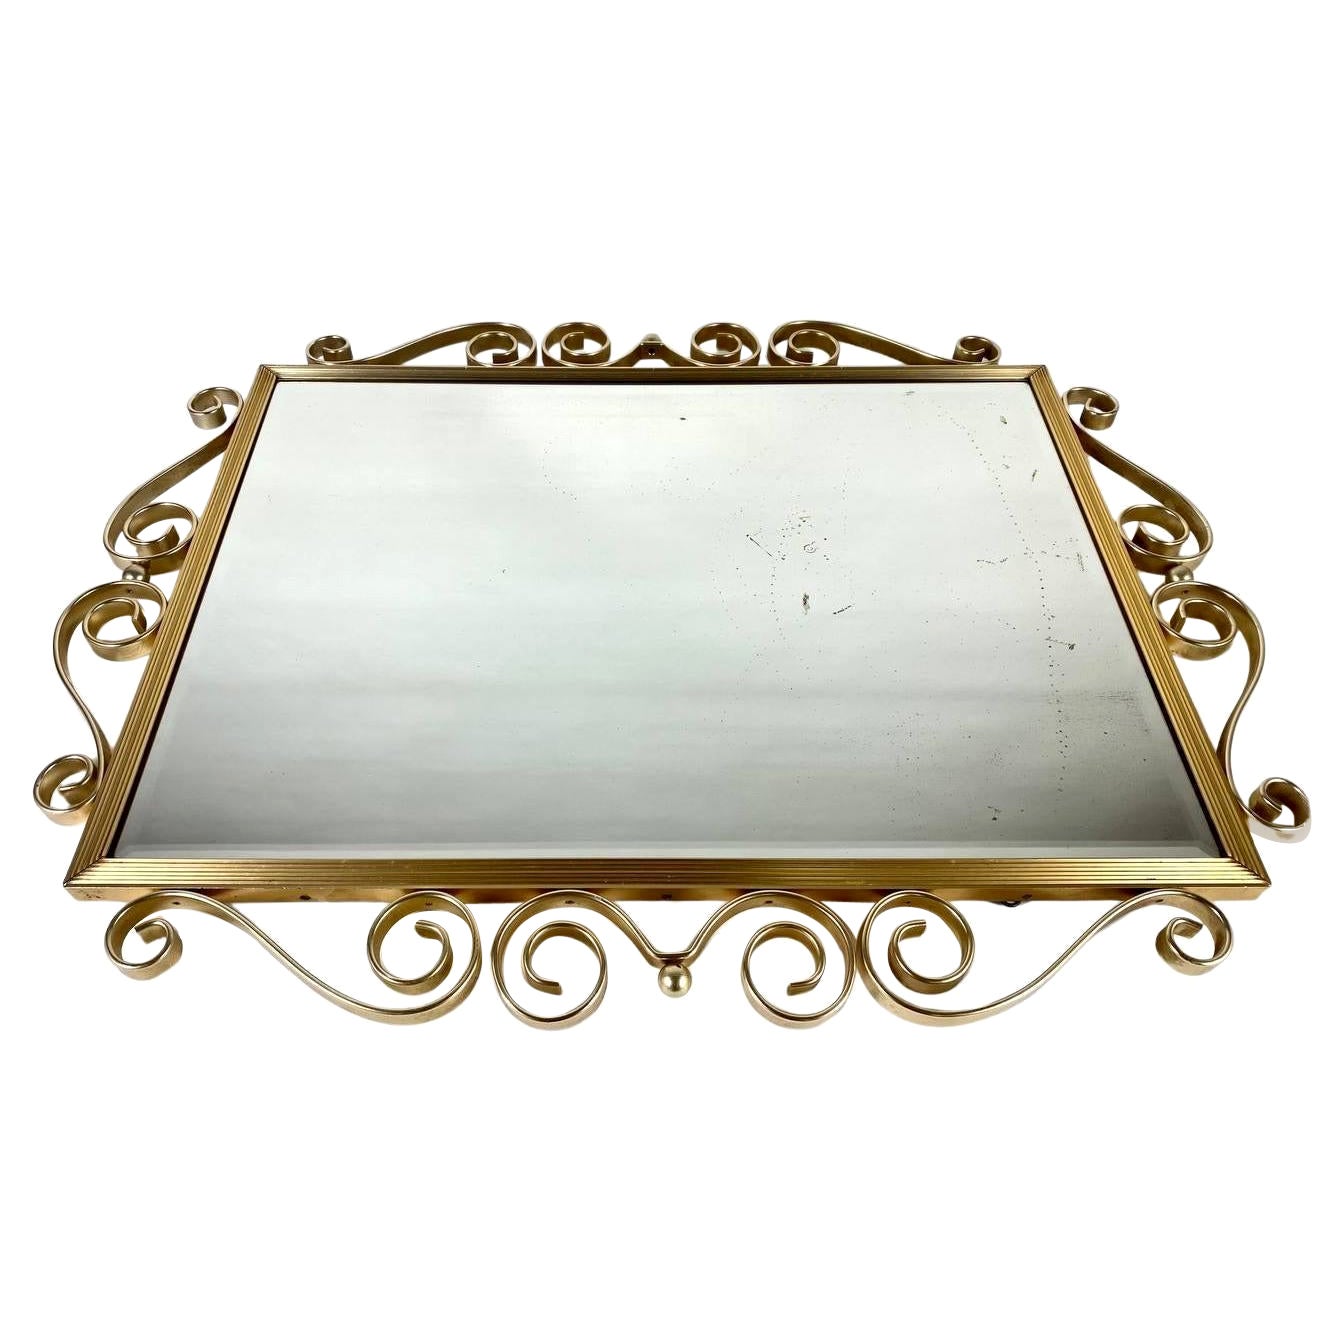 Hollywood Regency Style Wall Mirror in Forged Brass Frame, Belgium, 1960s For Sale